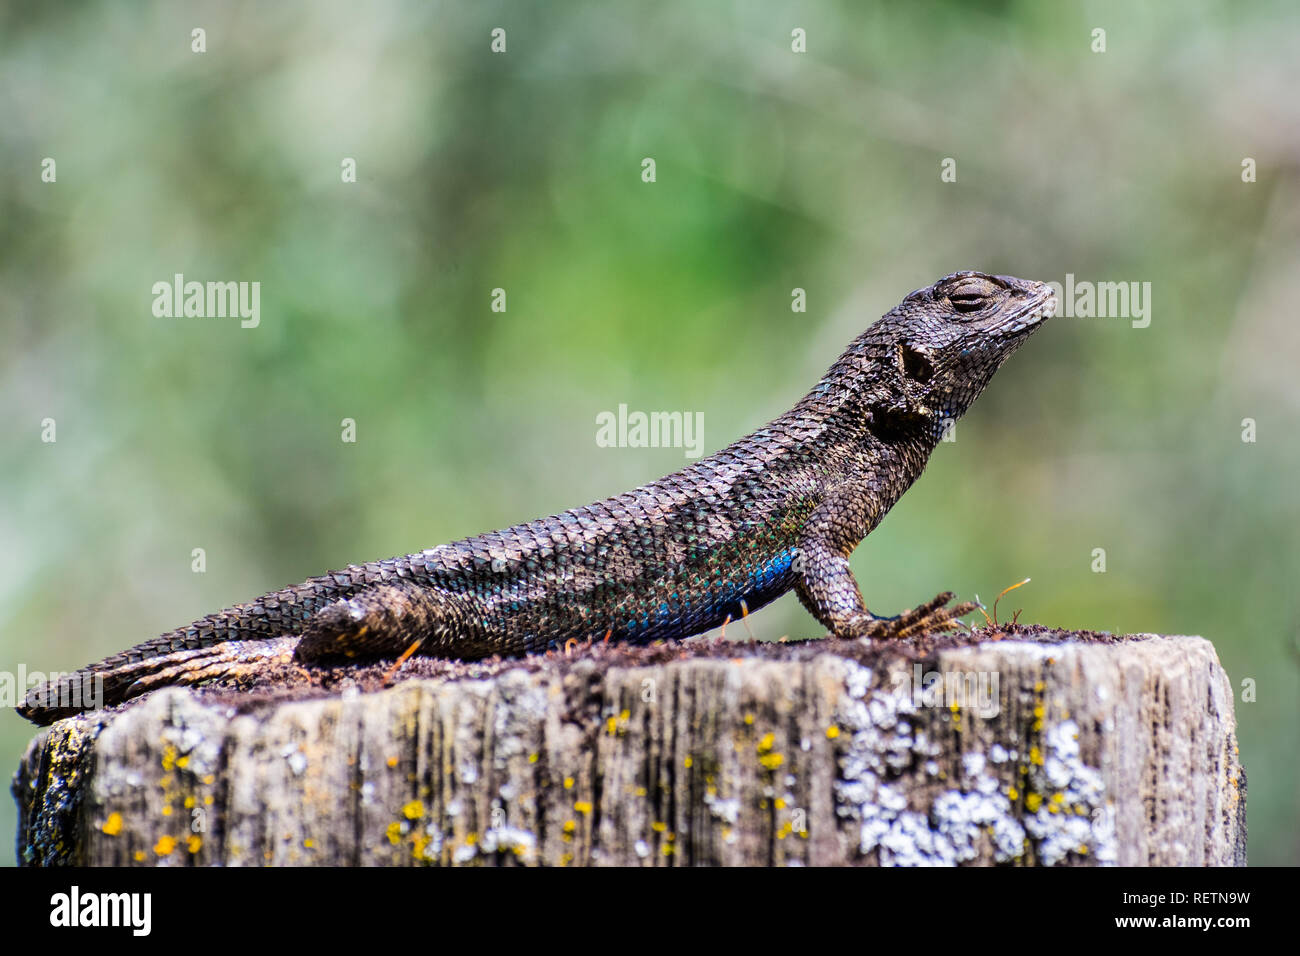 Western fence lizard (Sceloporus occidentalis) sitting on a wooden post on a sunny day; blue and green scales visible in the sunlight; San Francisco b Stock Photo